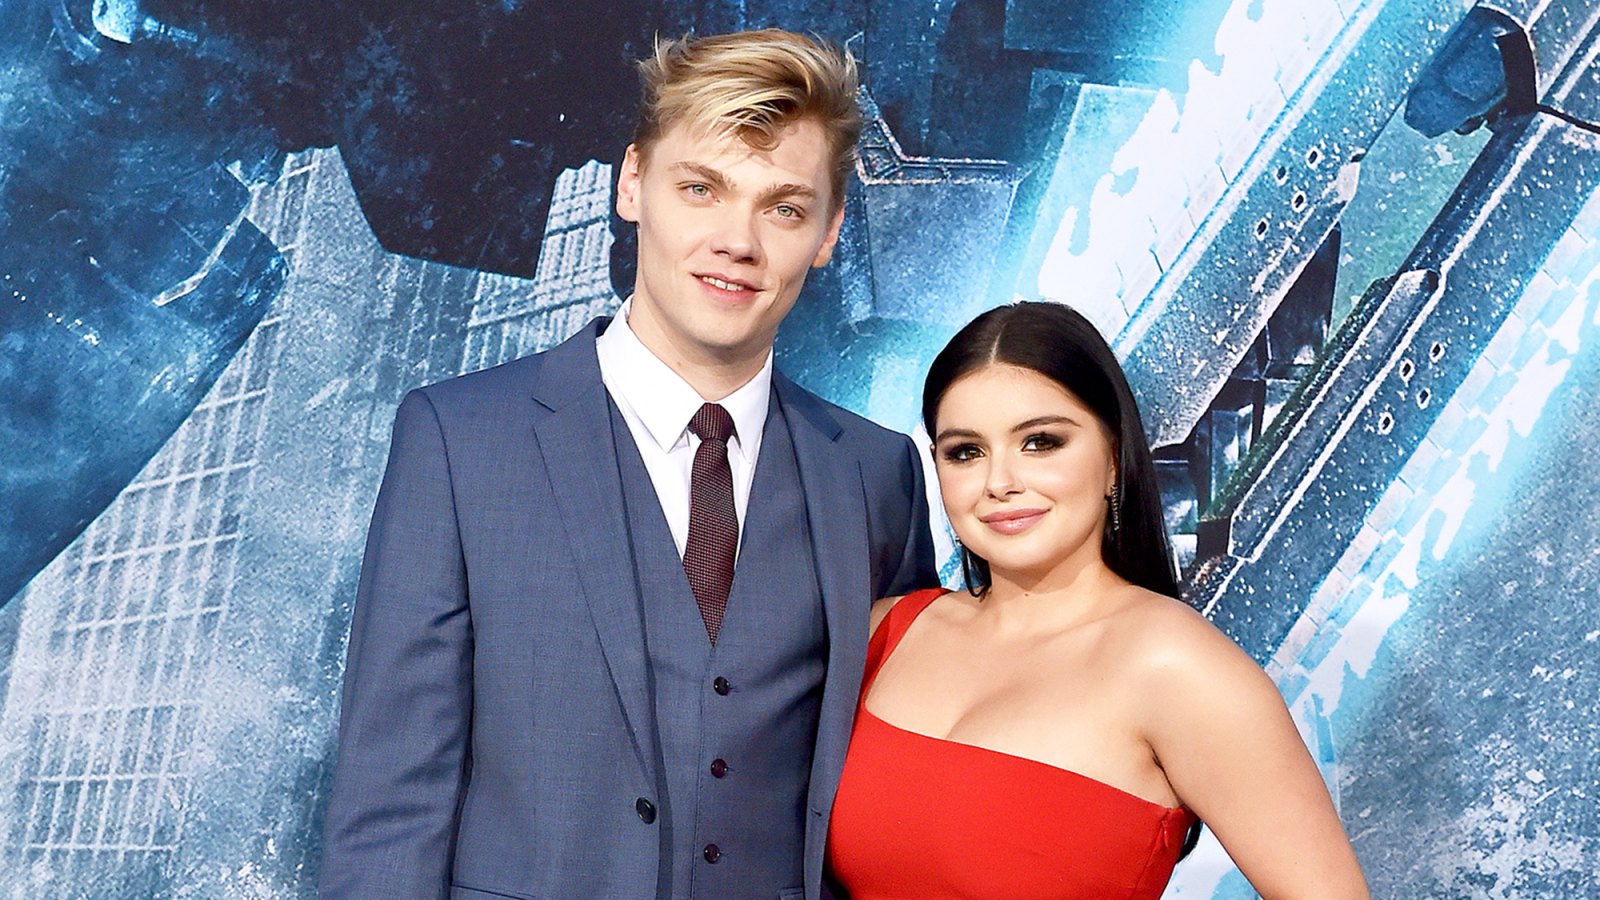 Levi Meaden and Ariel Winter arrive at Universal's 'Pacific Rim Uprising' premiere at TCL Chinese Theatre IMAX on March 21, 2018 in Hollywood, California.